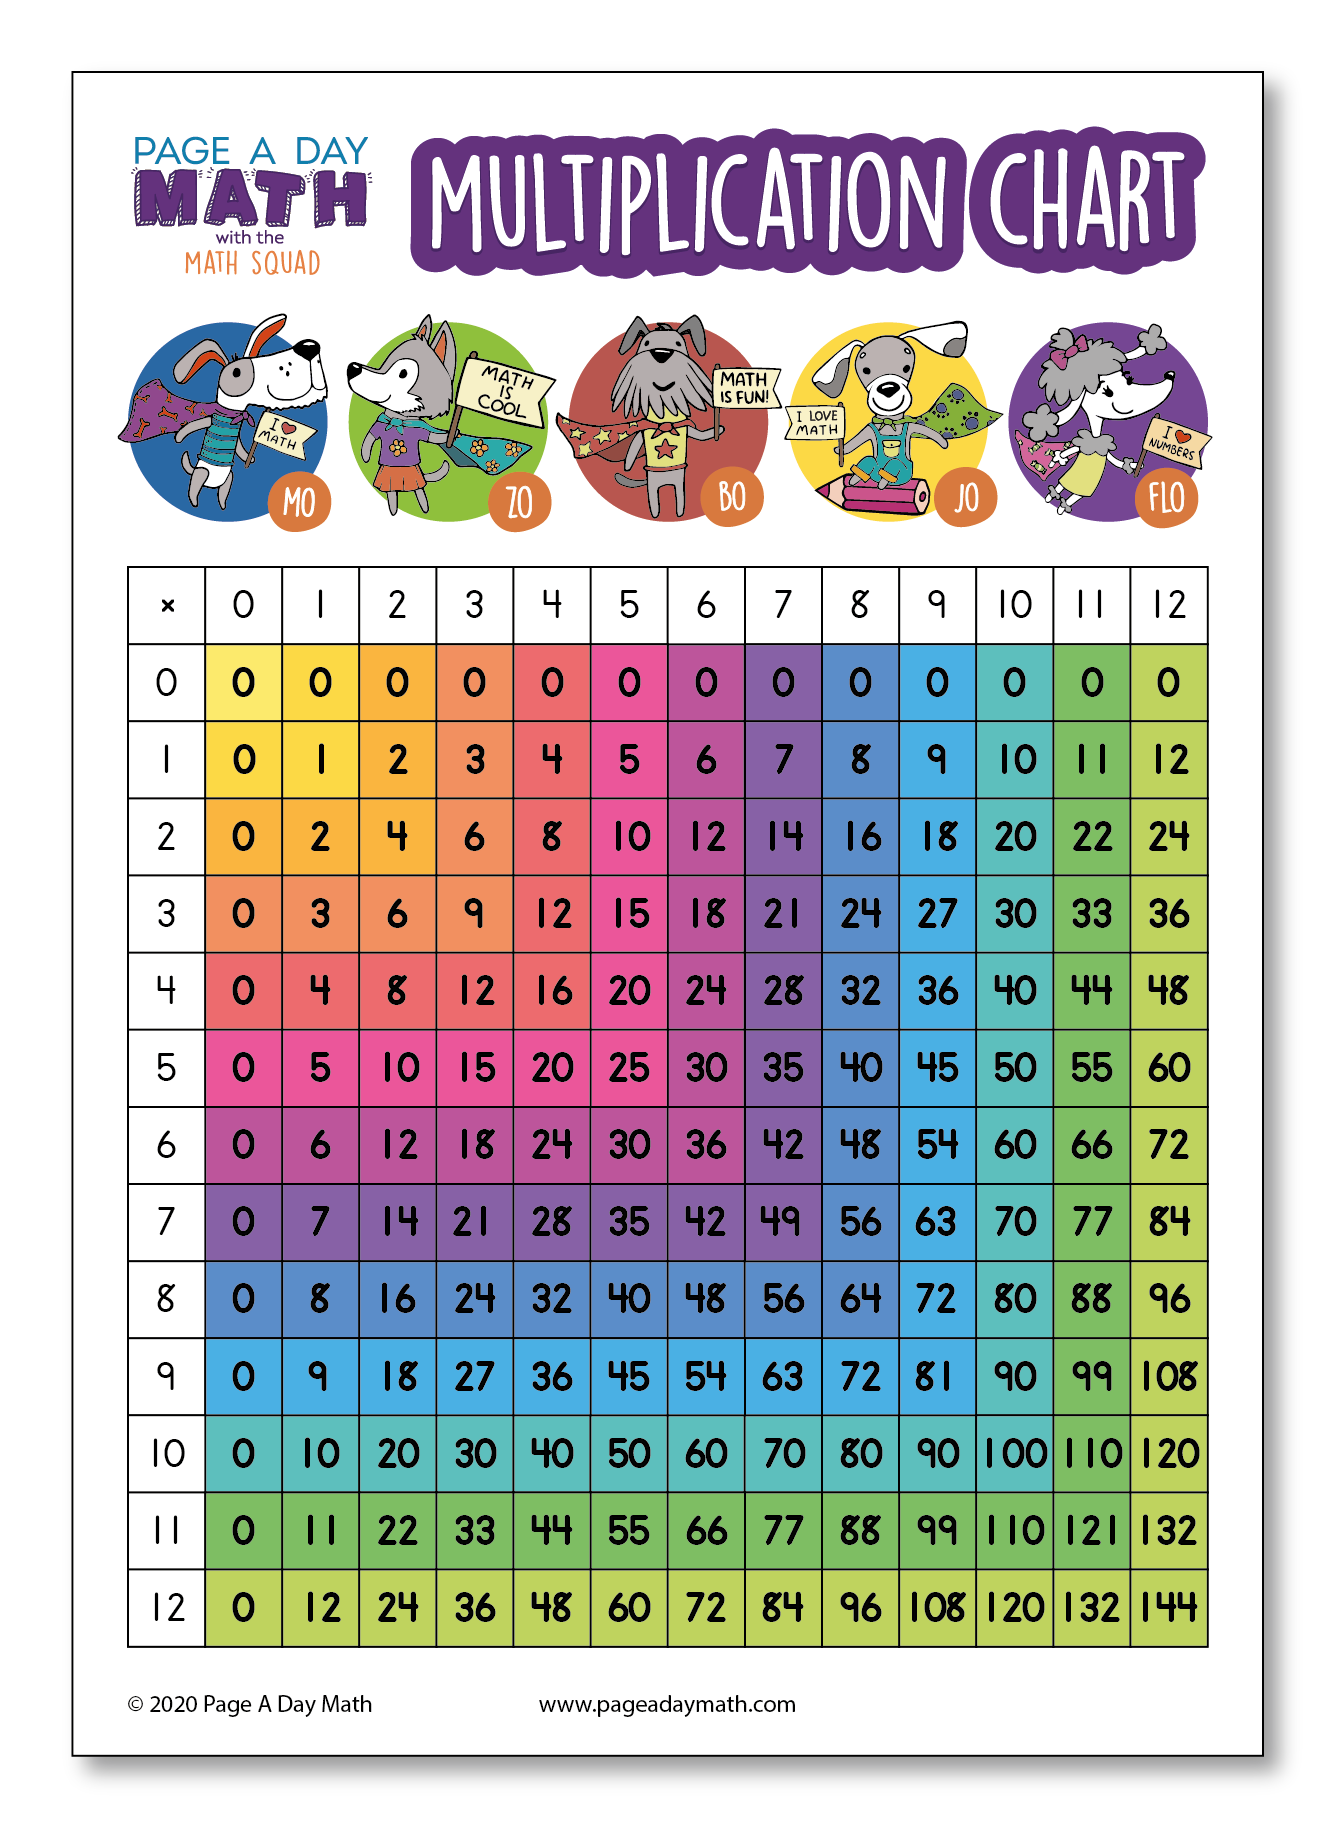 multipacation-chart-multiplication-chart-buy-multiplication-chart-by-dreamland-publications-at